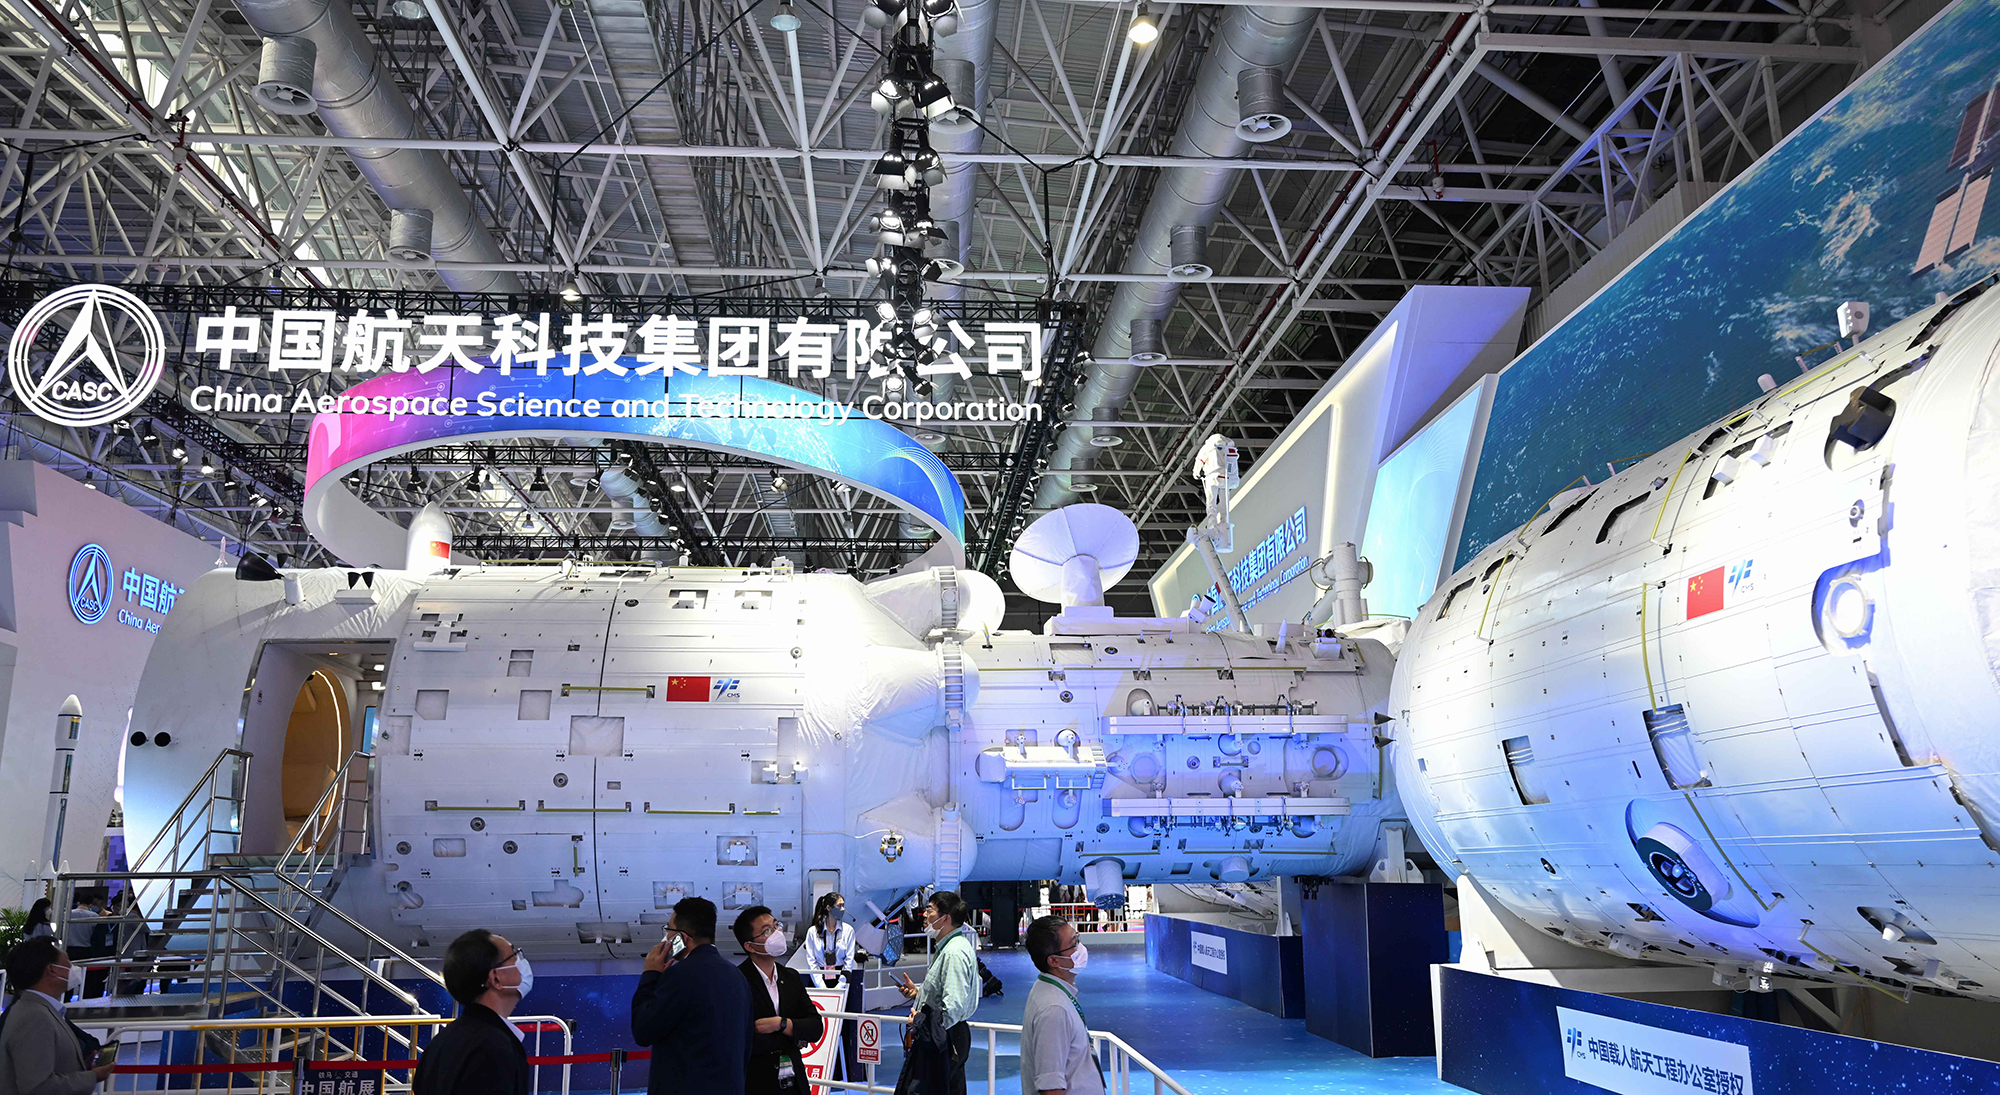 The exhibition included a life-size replica of the Tiangong space station